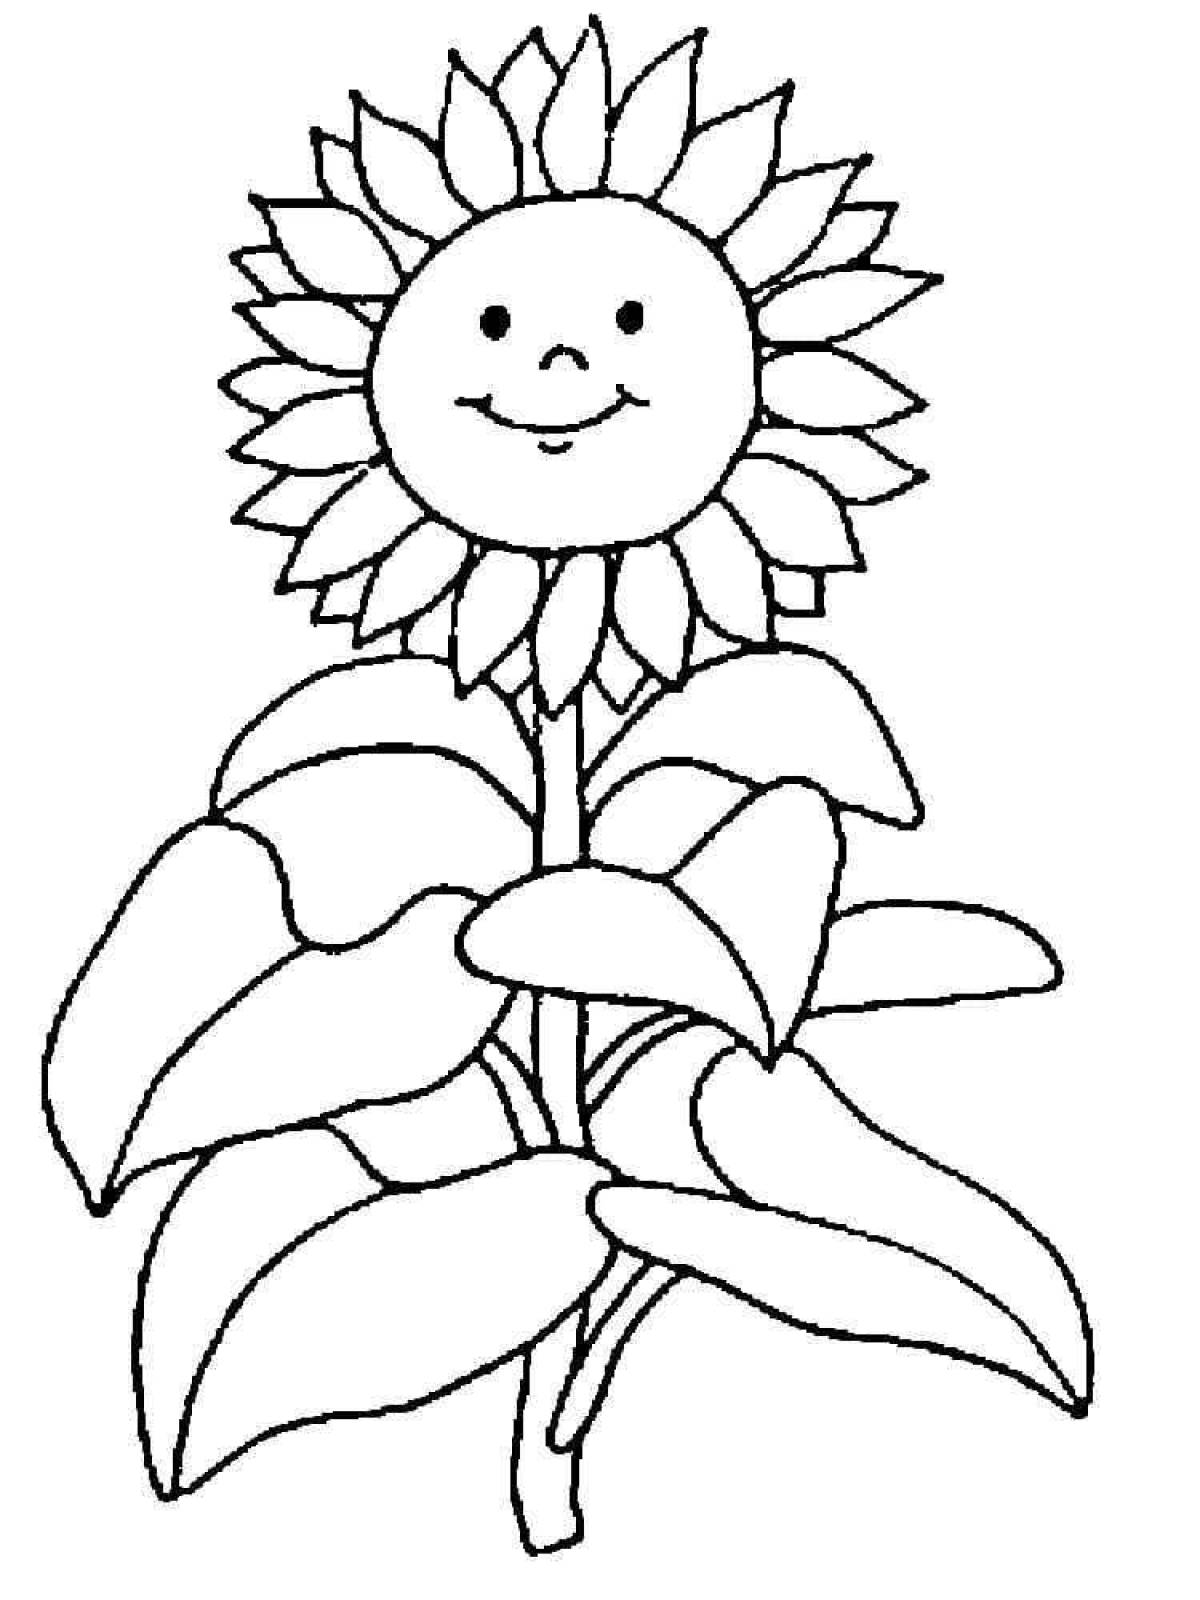 Fun coloring sunflowers for kids